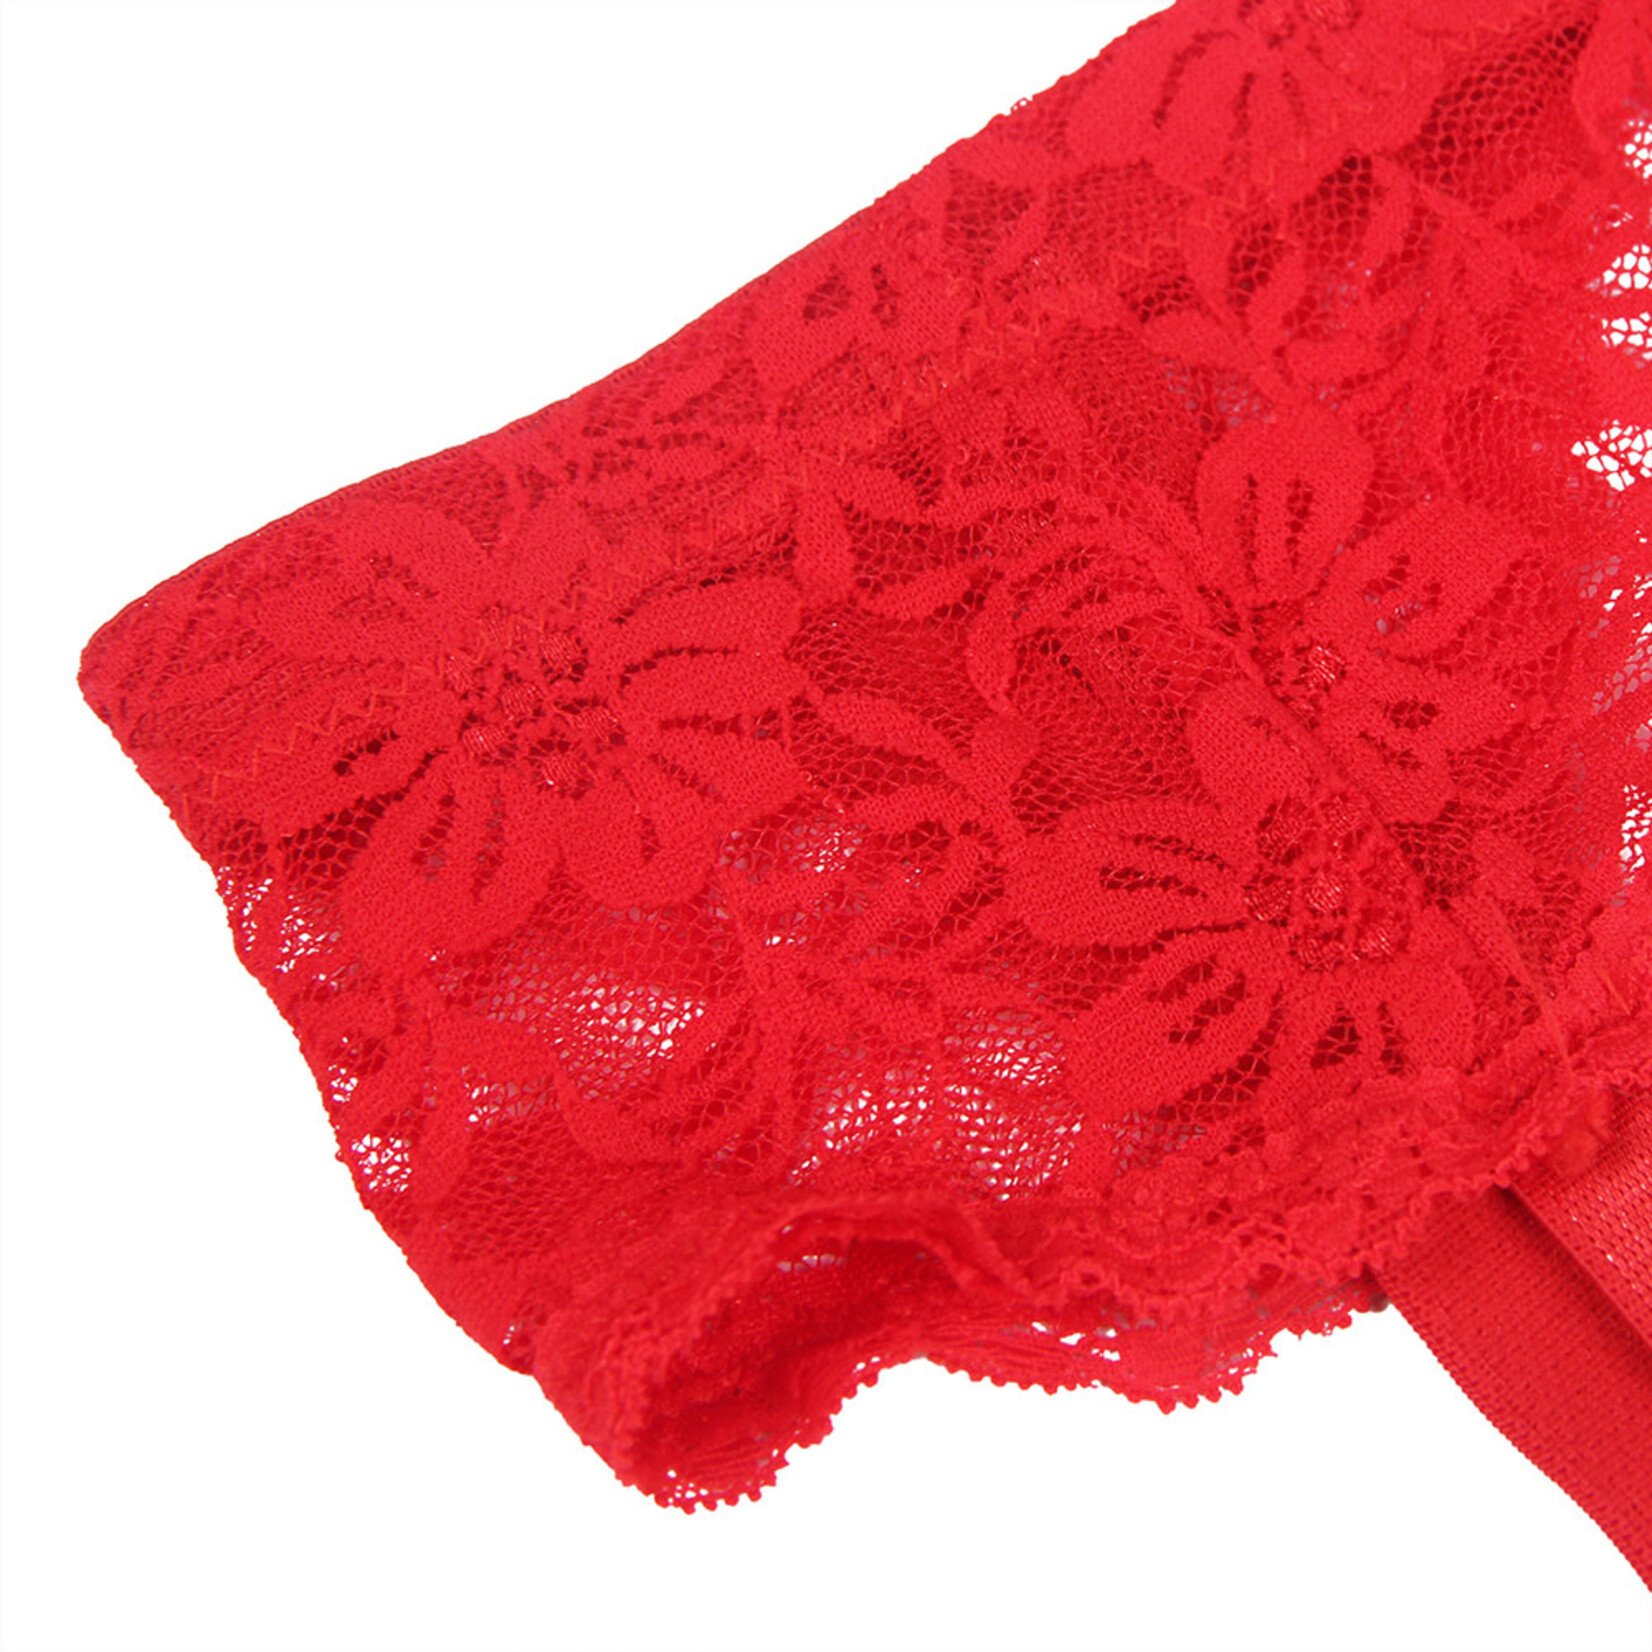 OH YEAH! -  RED LACE METAL BUTTON G STRING PANTIES WITH GARTER BELT 3XL-4XL